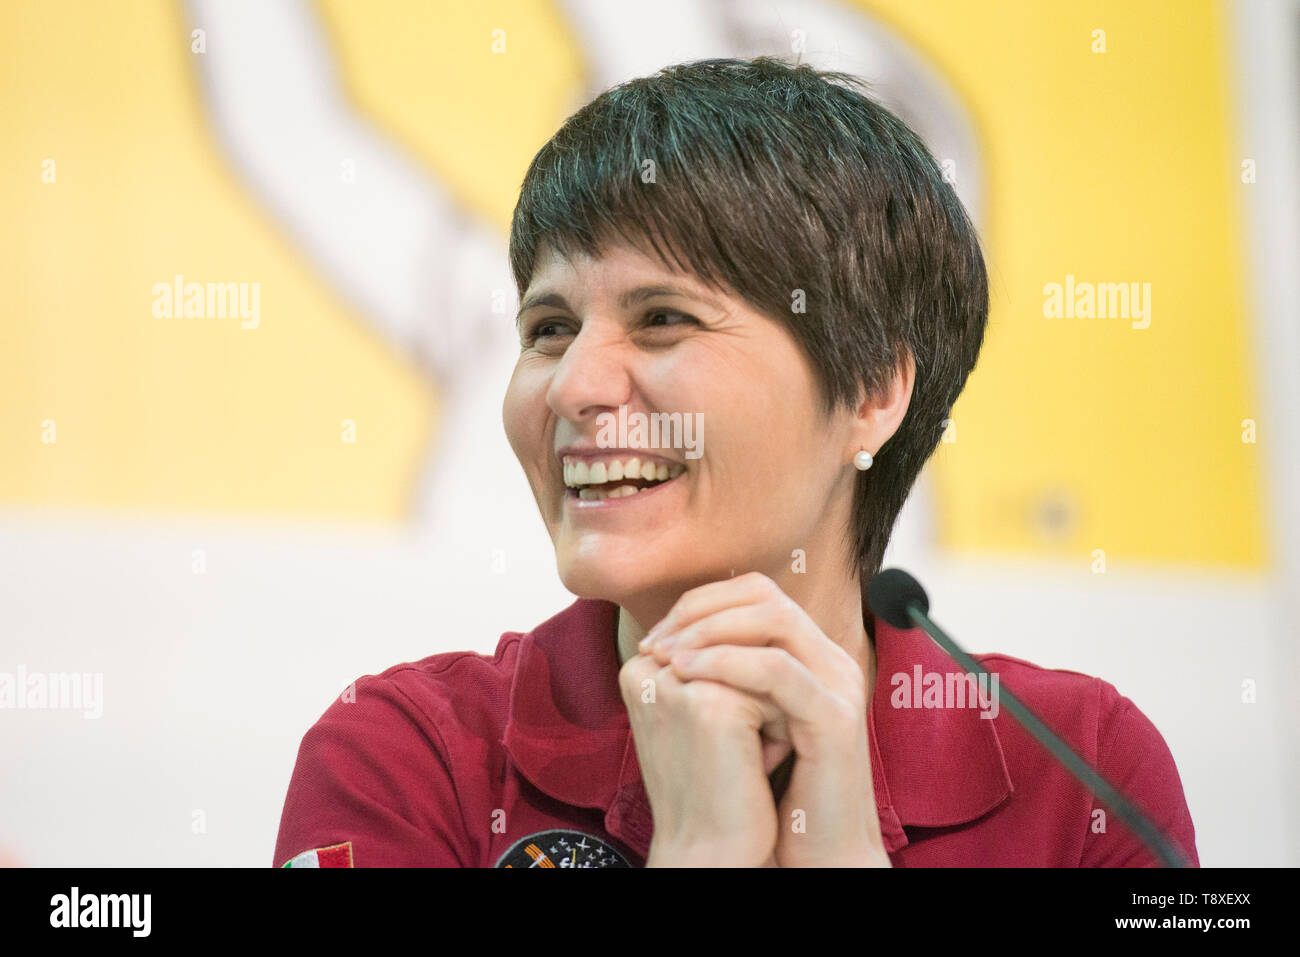 Turin, Piedmont, Italy. 9th May, 2019. Turin, Italy-May 9, 2019: Samantha Cristoforetti during the Inauguration of the Turin International Book Fair Credit: Stefano Guidi/ZUMA Wire/Alamy Live News Stock Photo